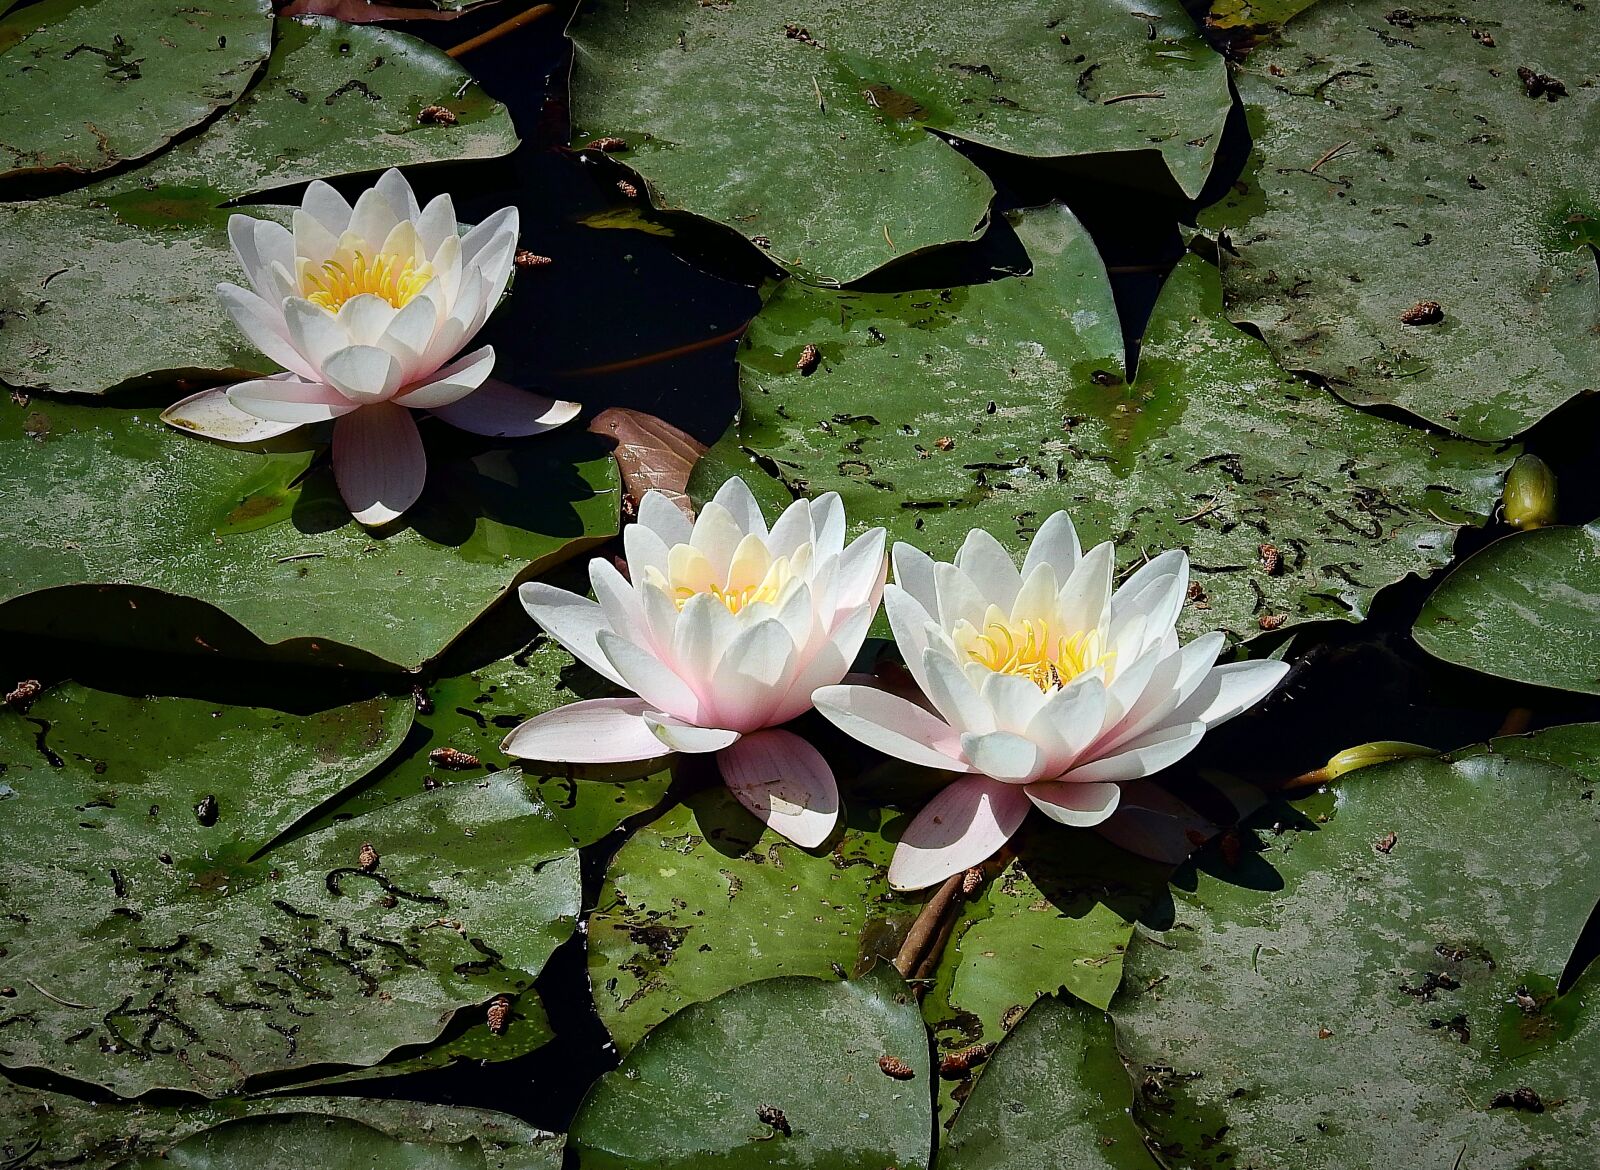 Nikon Coolpix P900 sample photo. Water lilies, the beauty photography